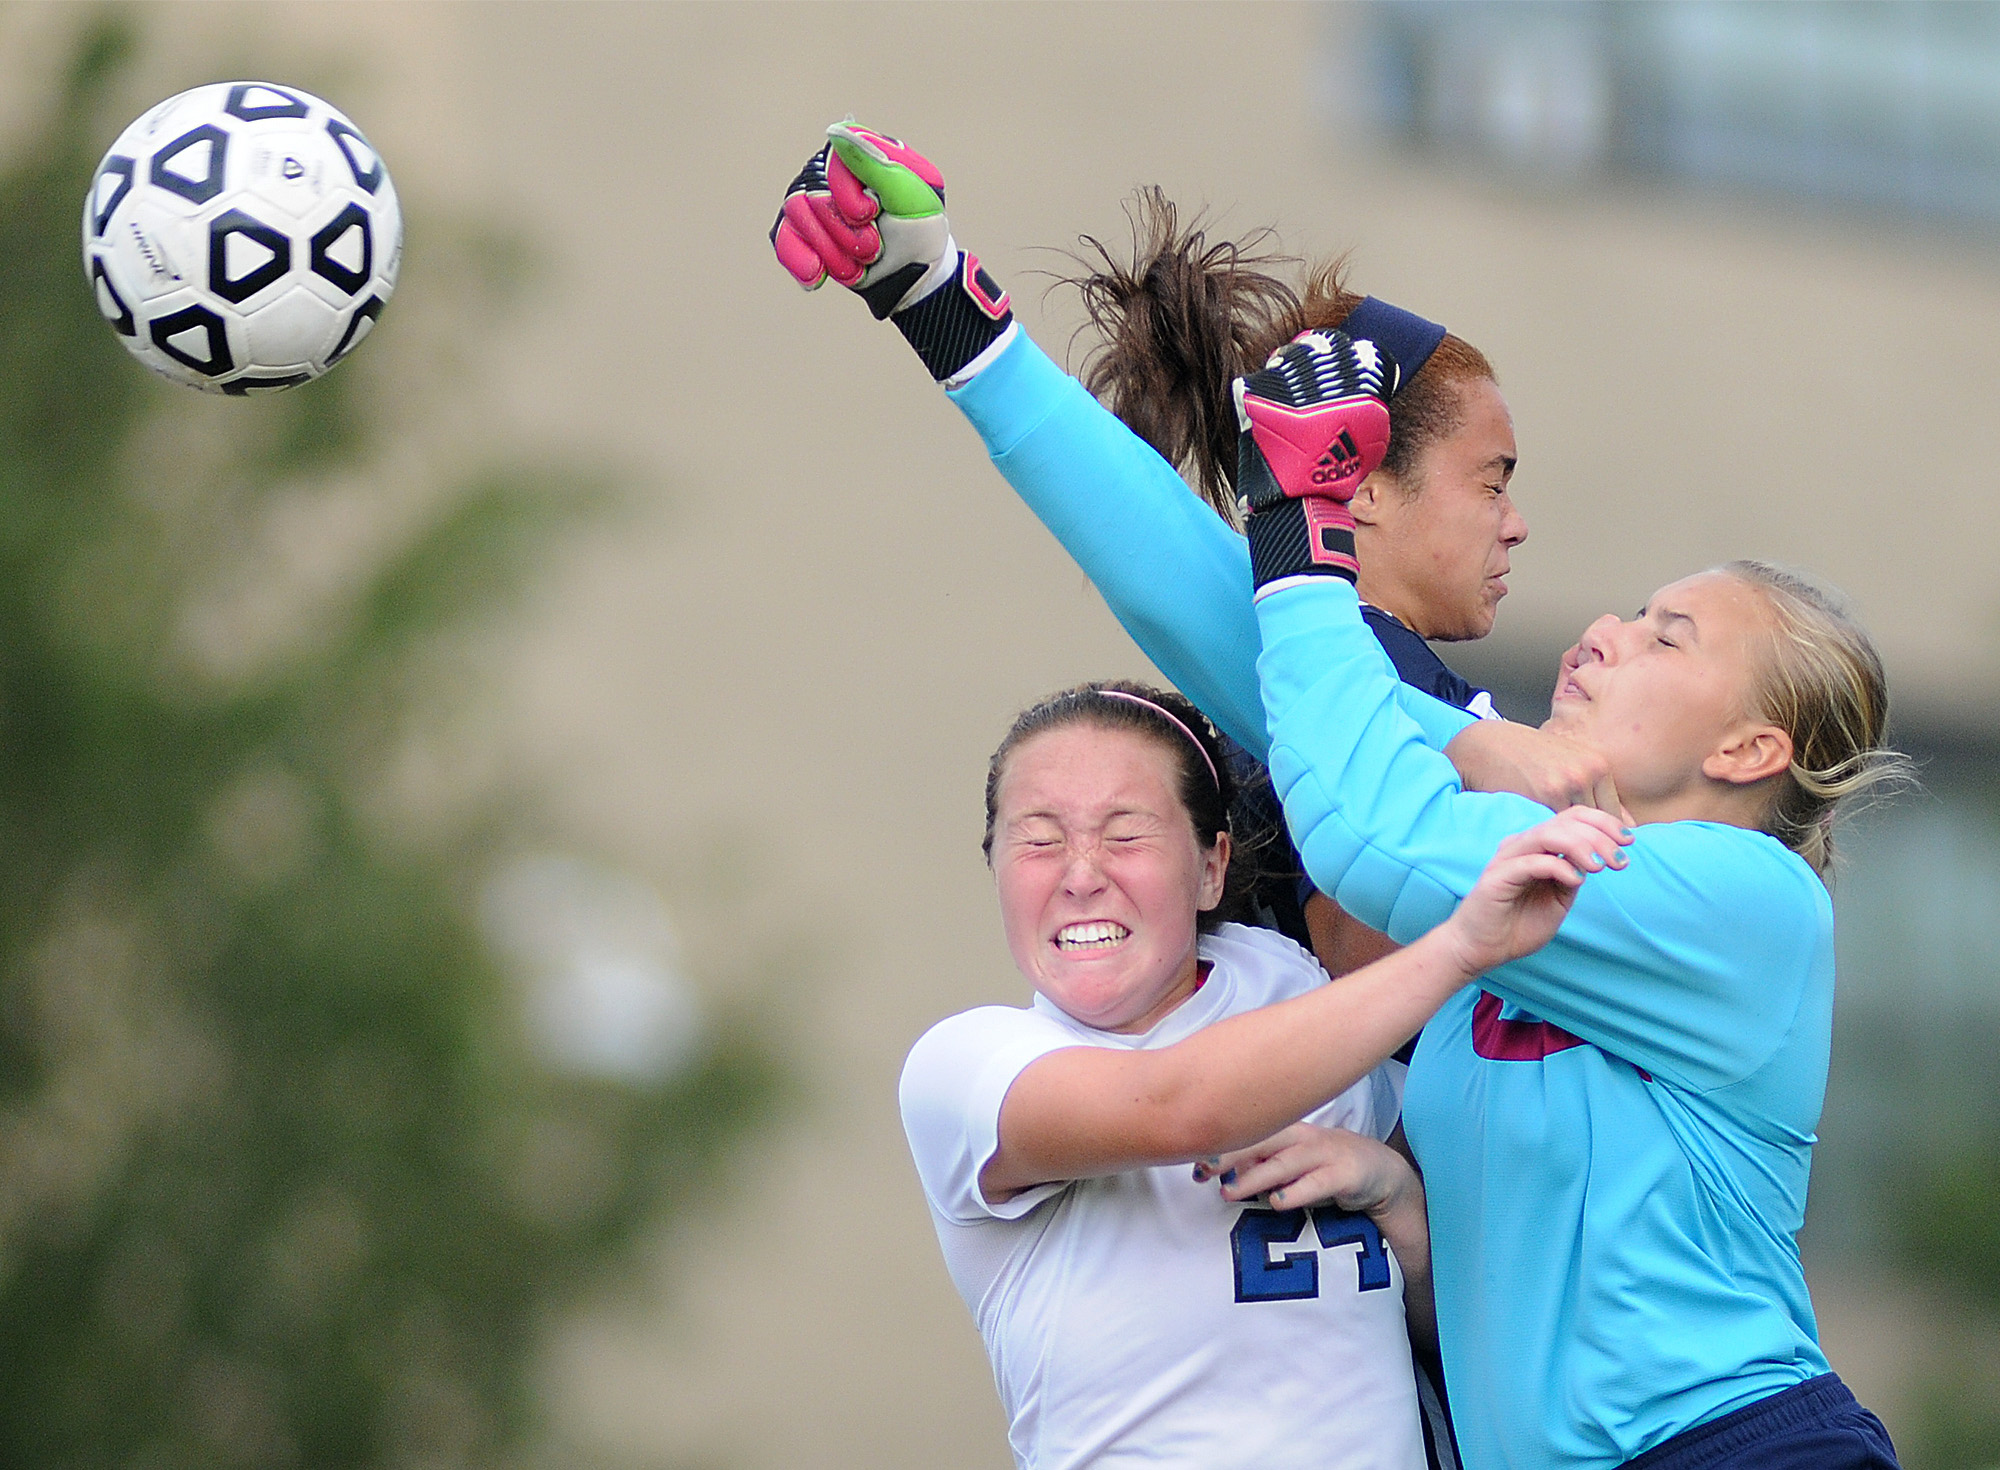  Cardinal O'Hara goal keeper Carrie Zamonski (31) punches the ball away from teammate Alex Patrick (24) and Conwell-Egan's Bailey Brown (24) during their game at Conwell-Egan Catholic High School in Bristol Township. 